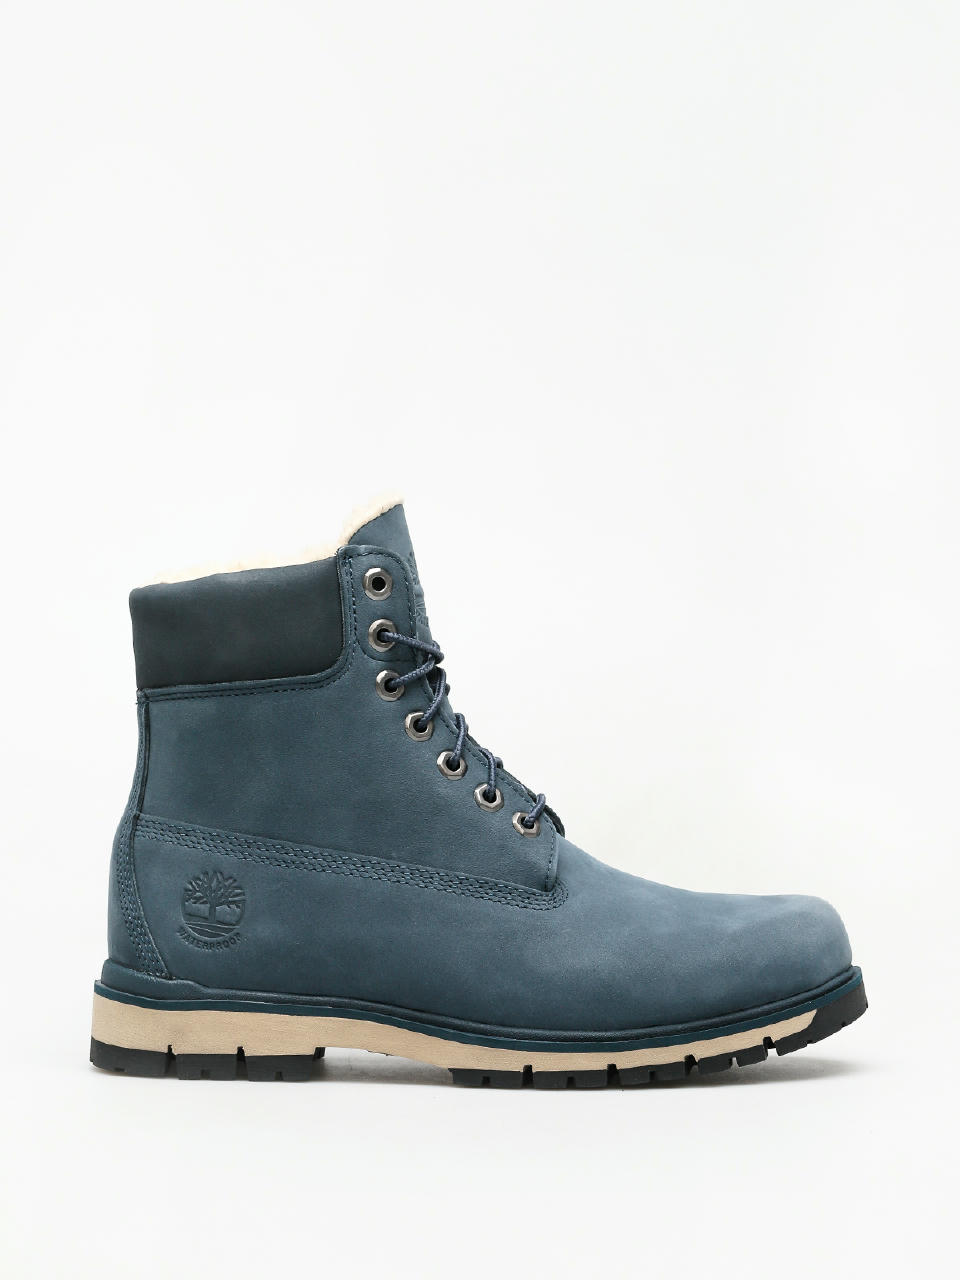 Timberland Radford Lined Boot Wp Winter shoes (patriot blue)